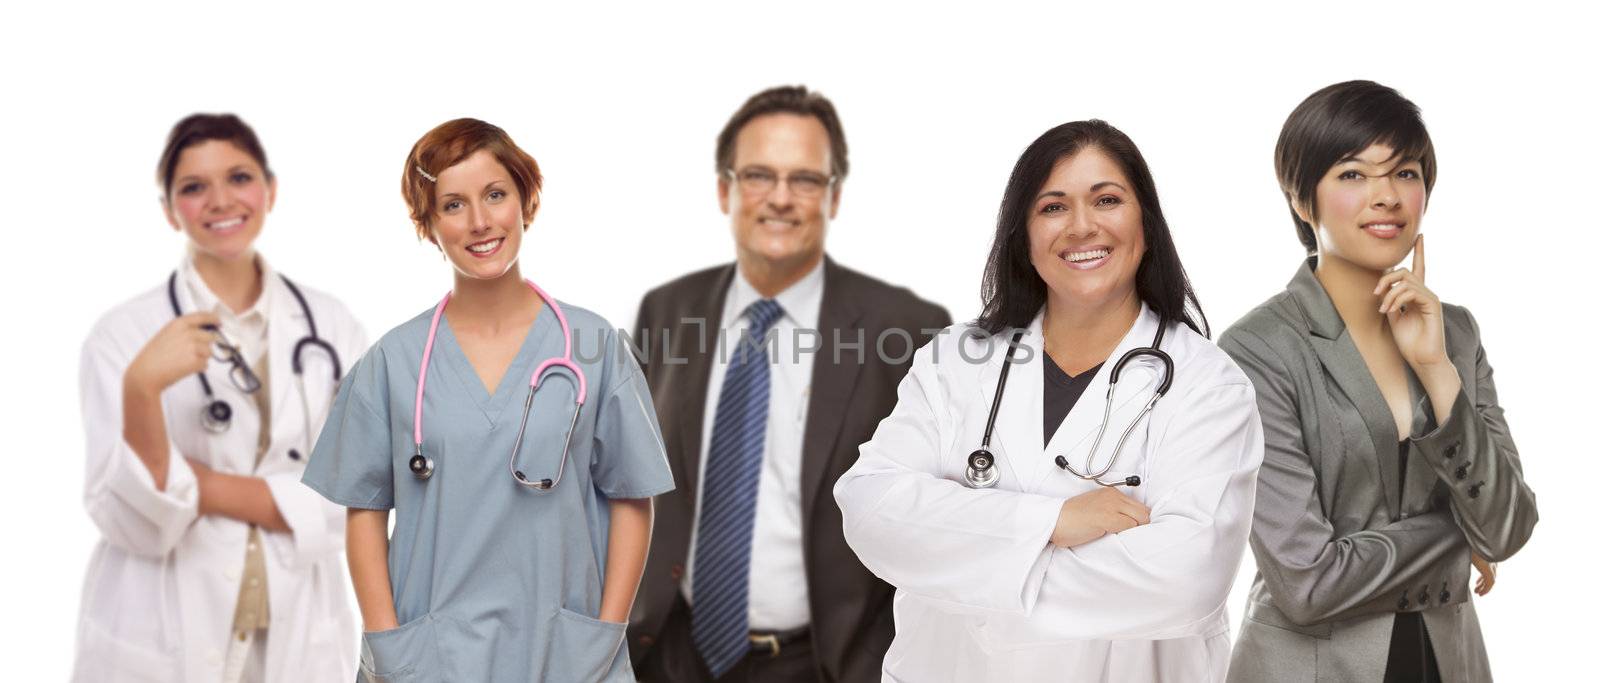 Small Group of Medical and Business People Isolated on a White Background.